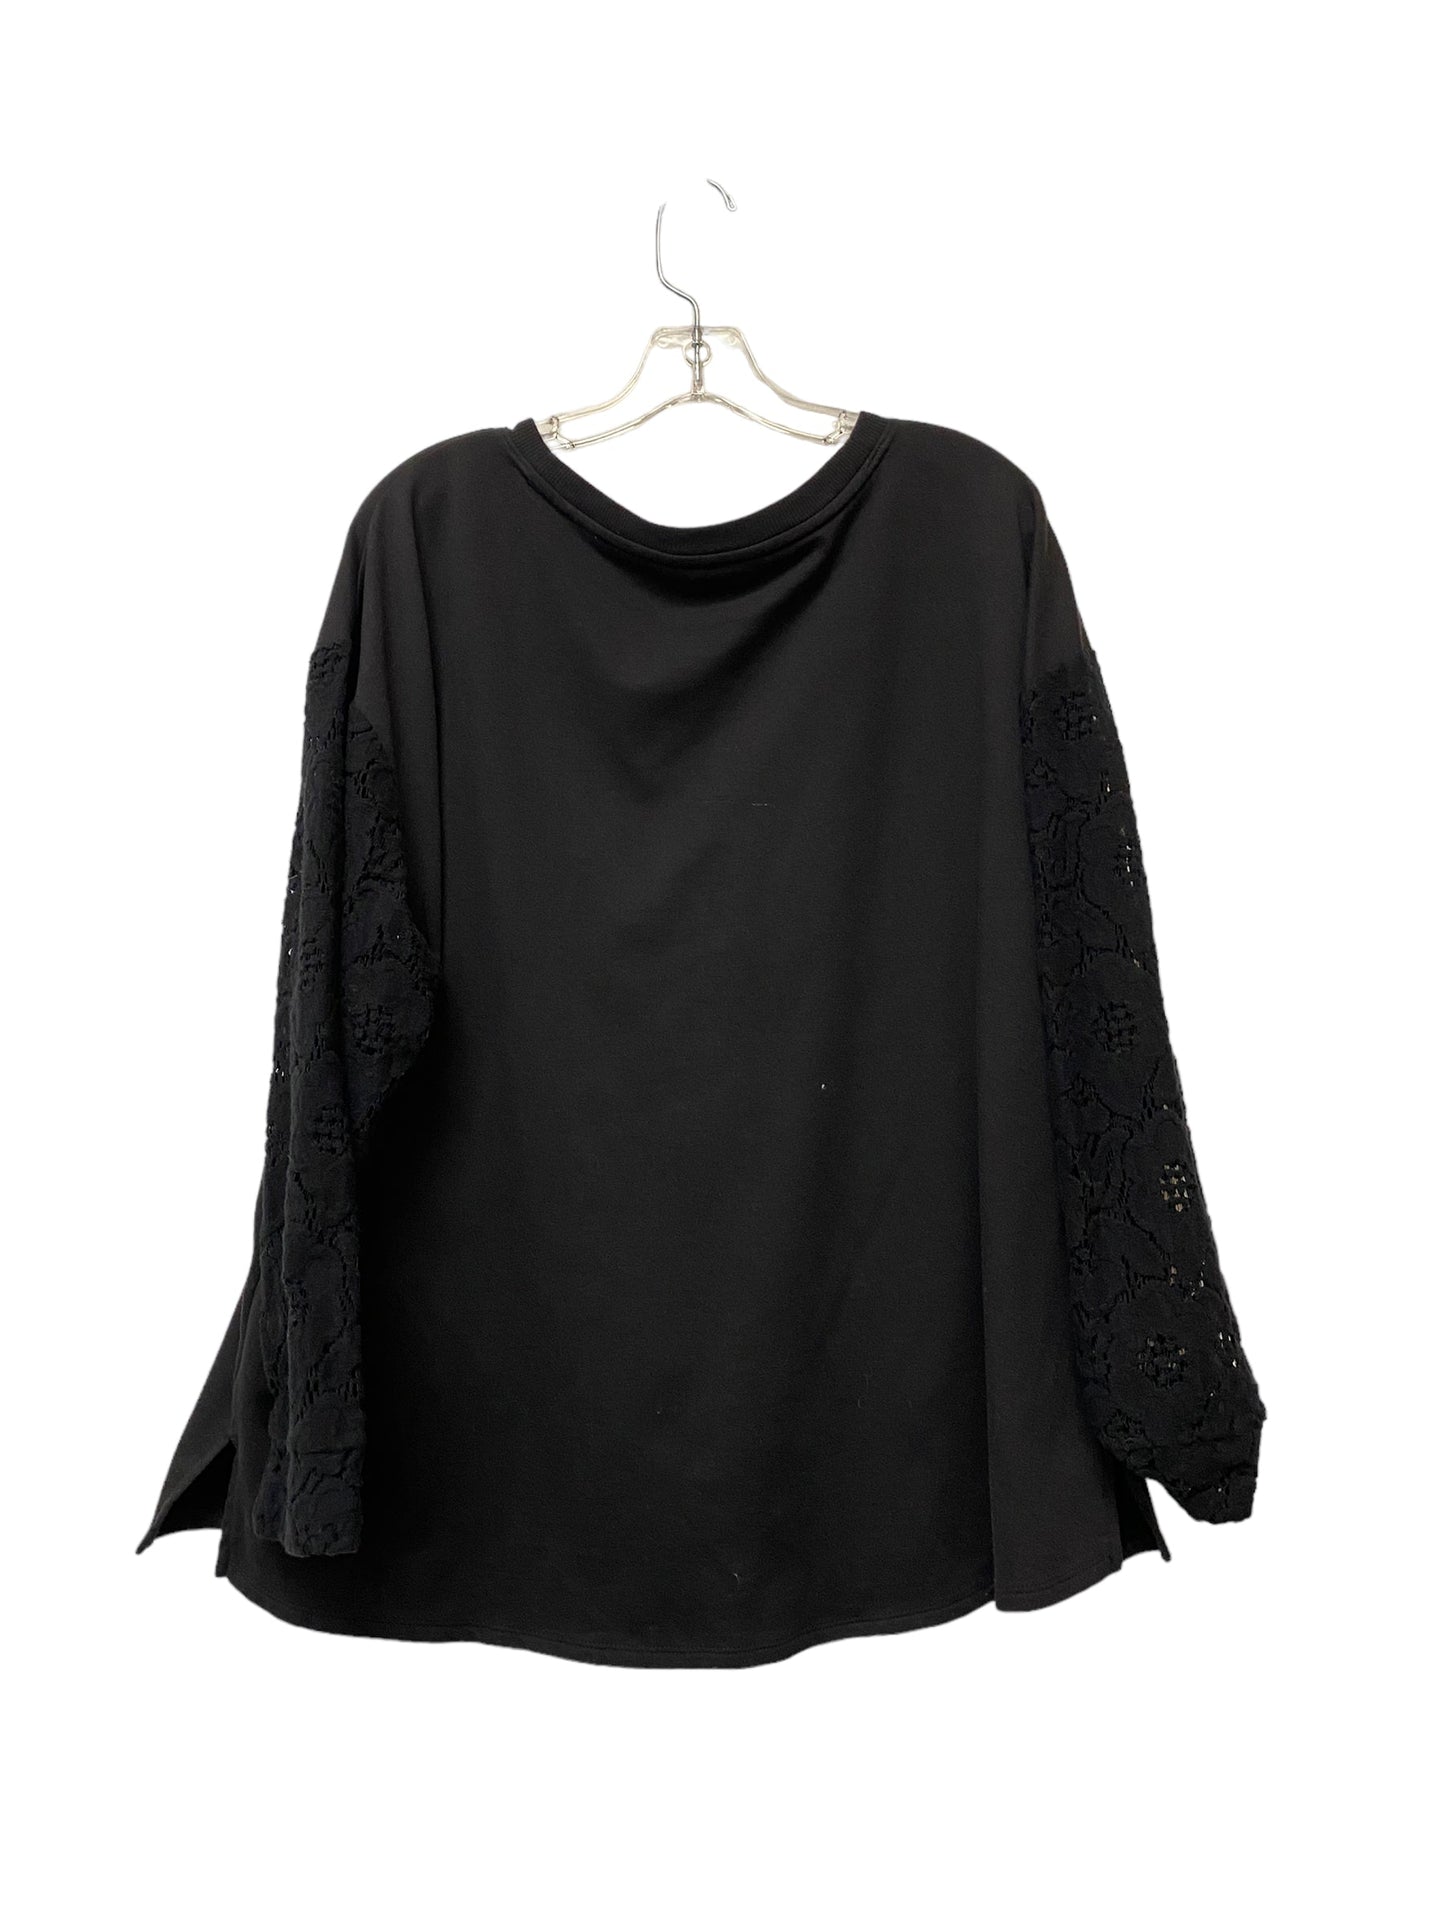 Top Long Sleeve By Simply Vera  Size: 1x